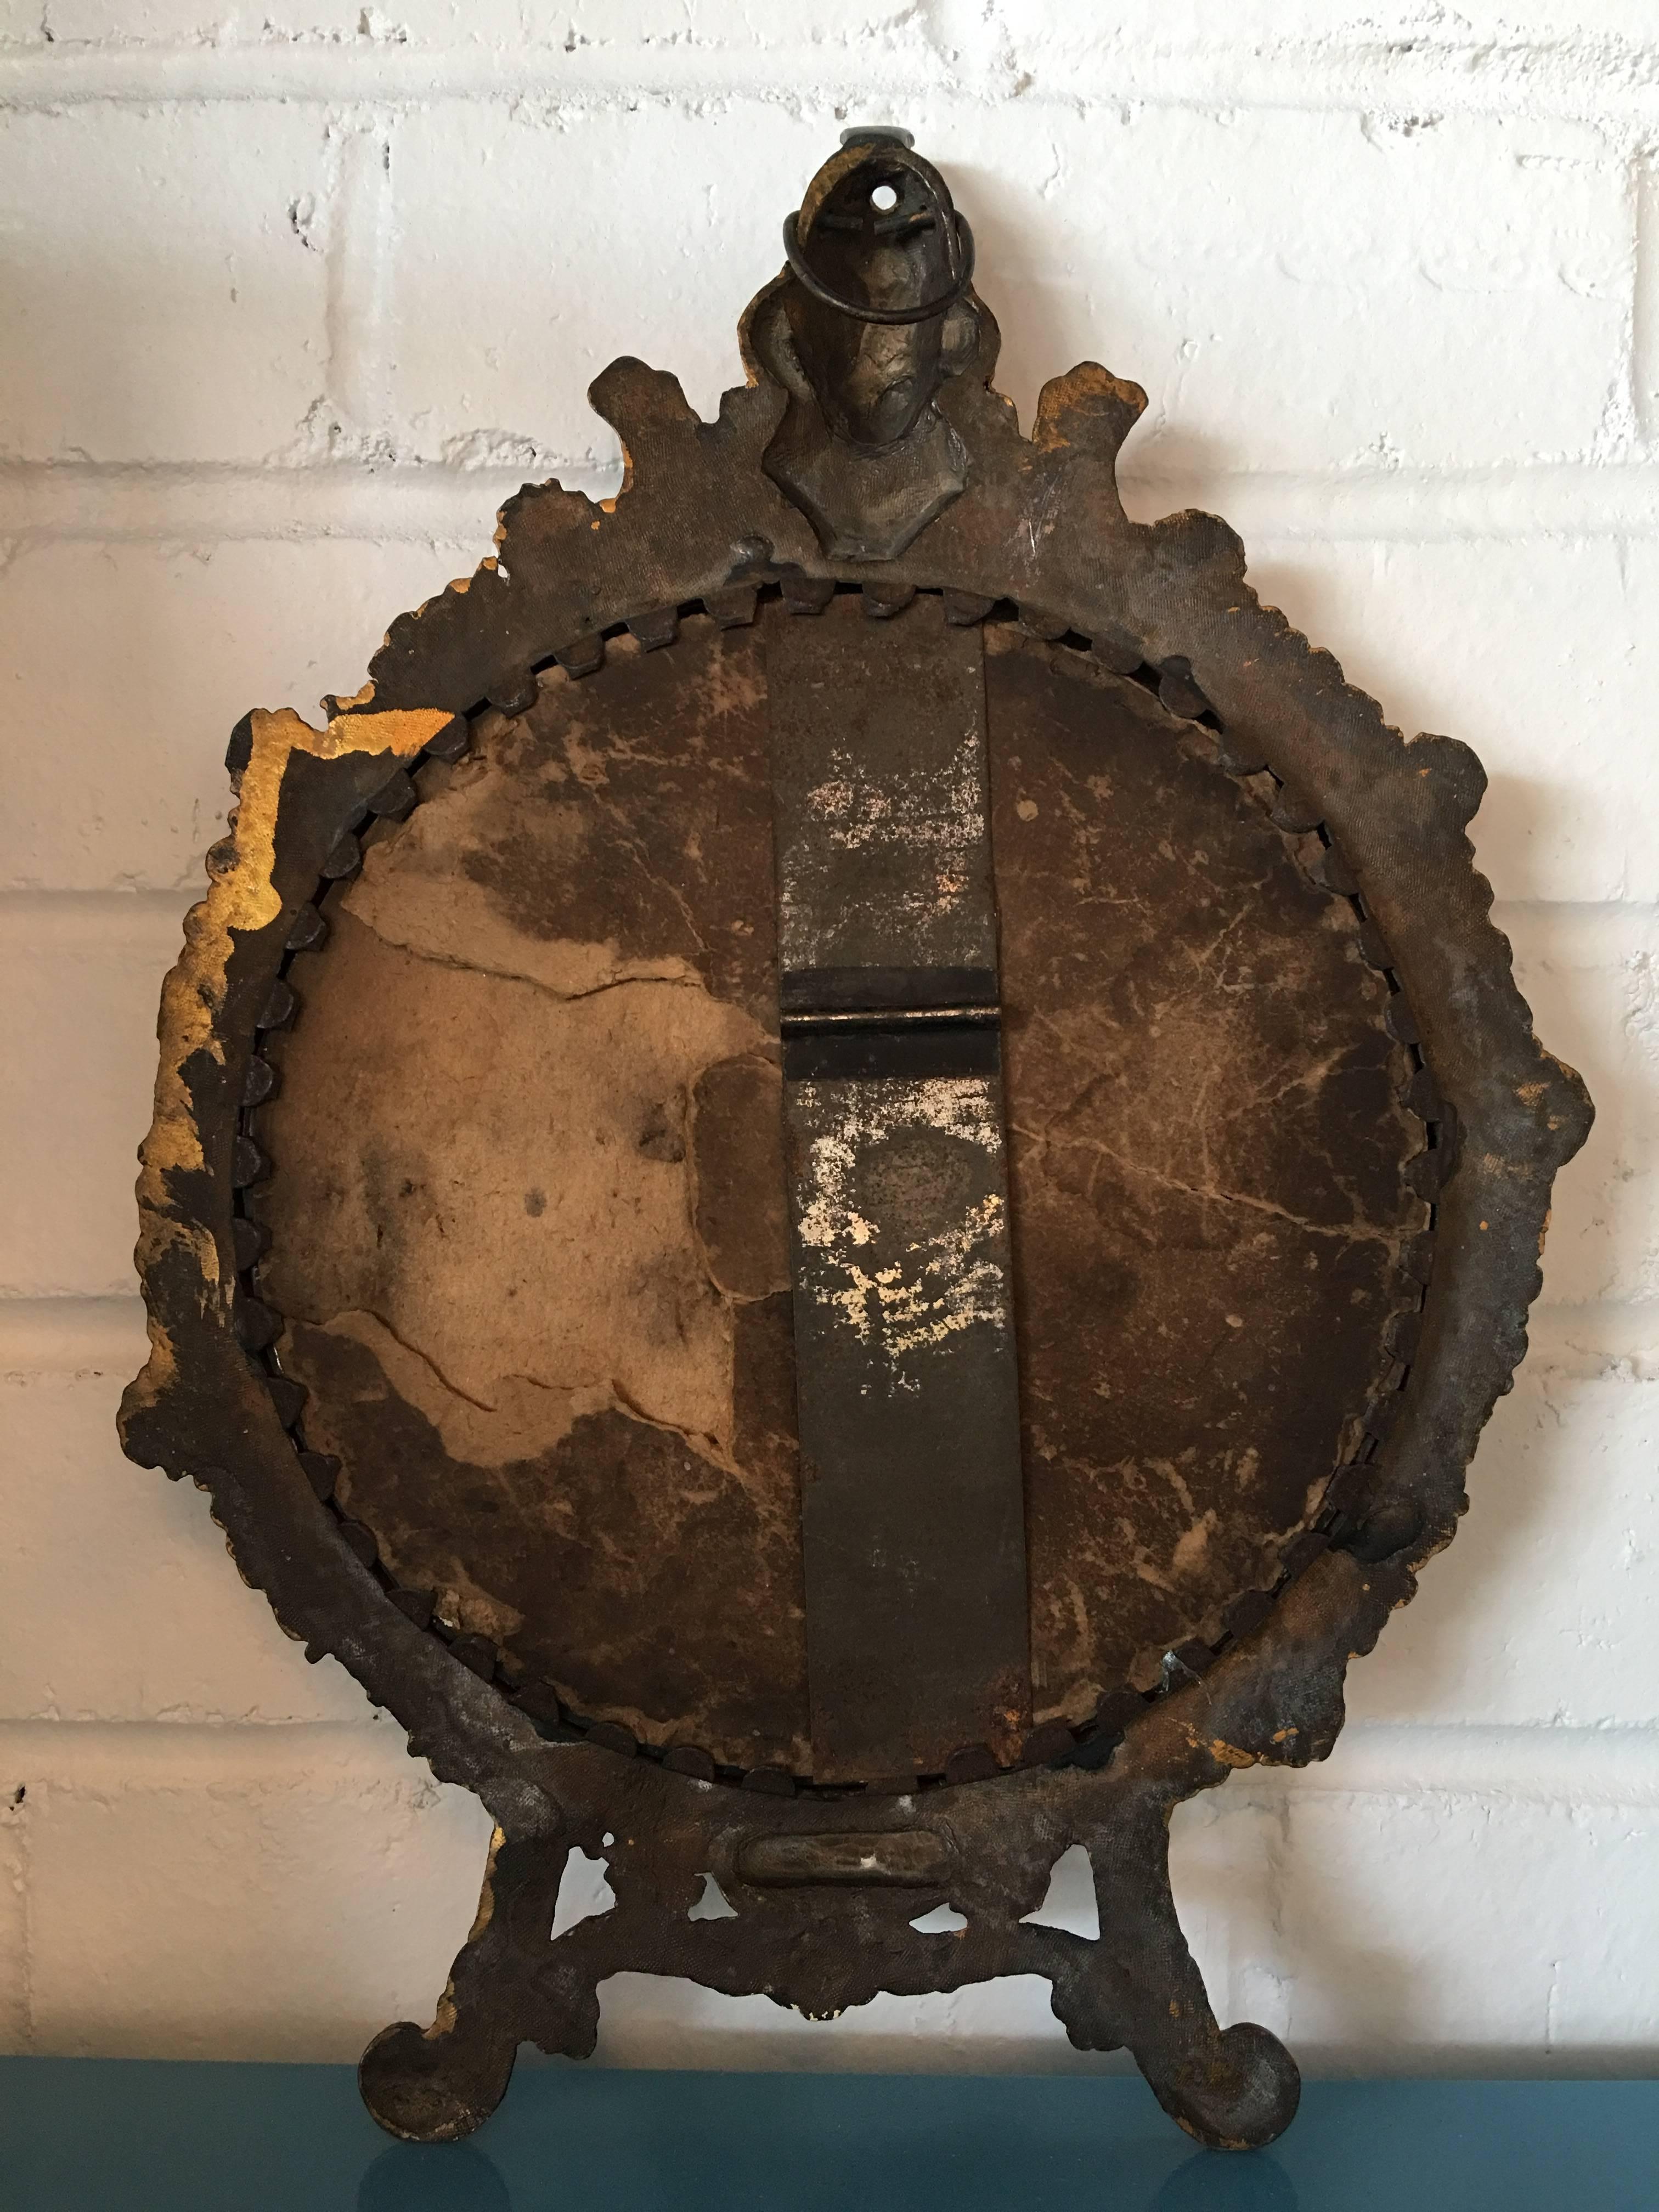 This lovely antique gold tabletop mirror is labelled 